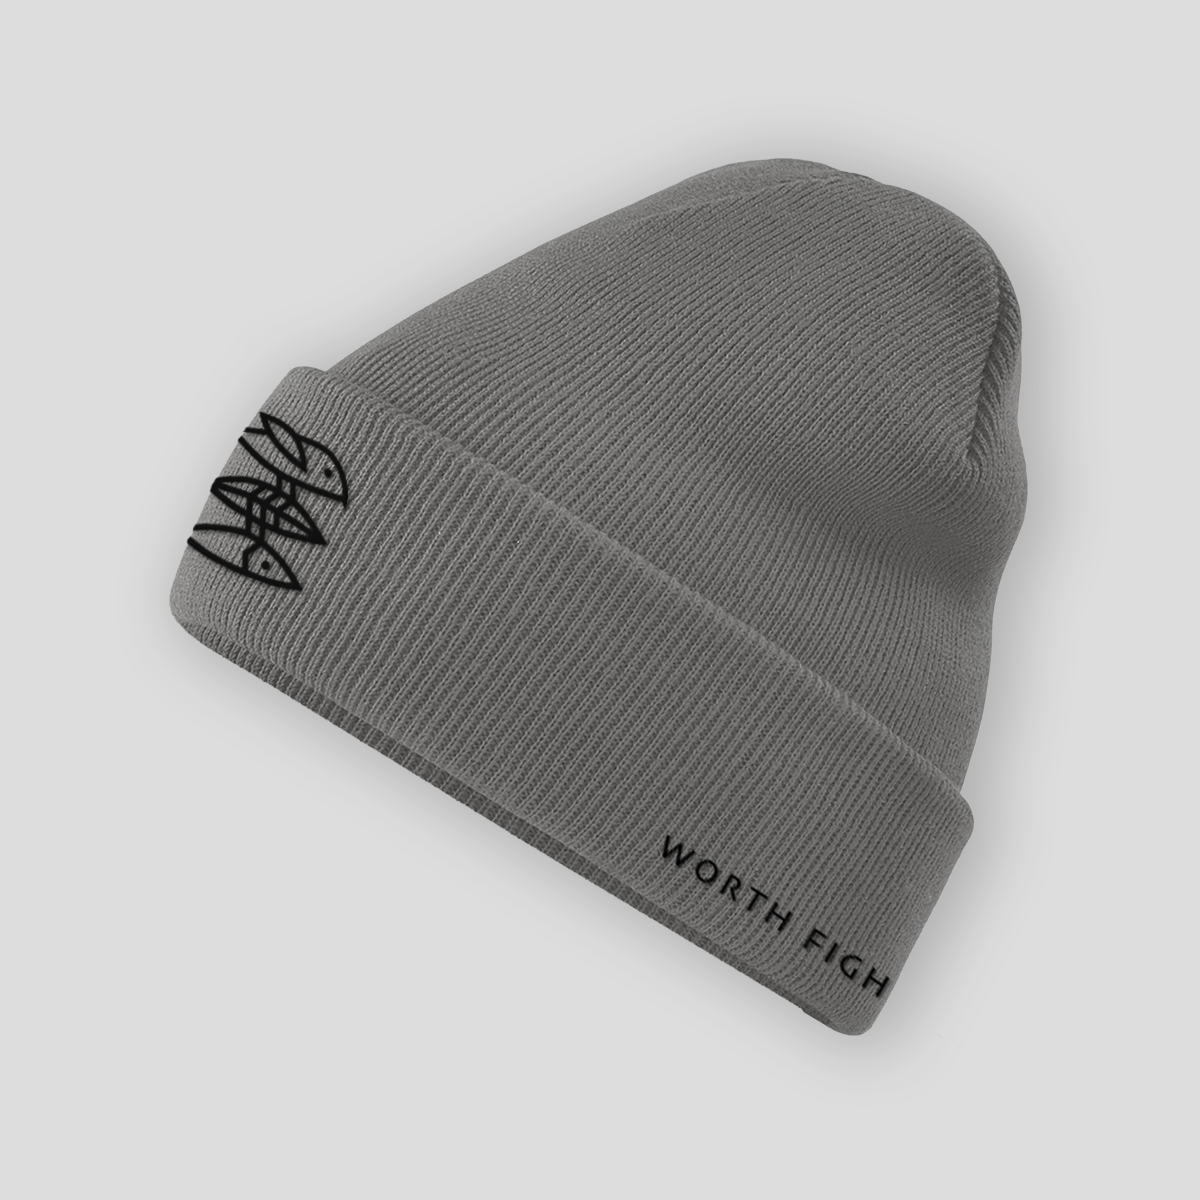 Beanie "Worth fighting for" Grey